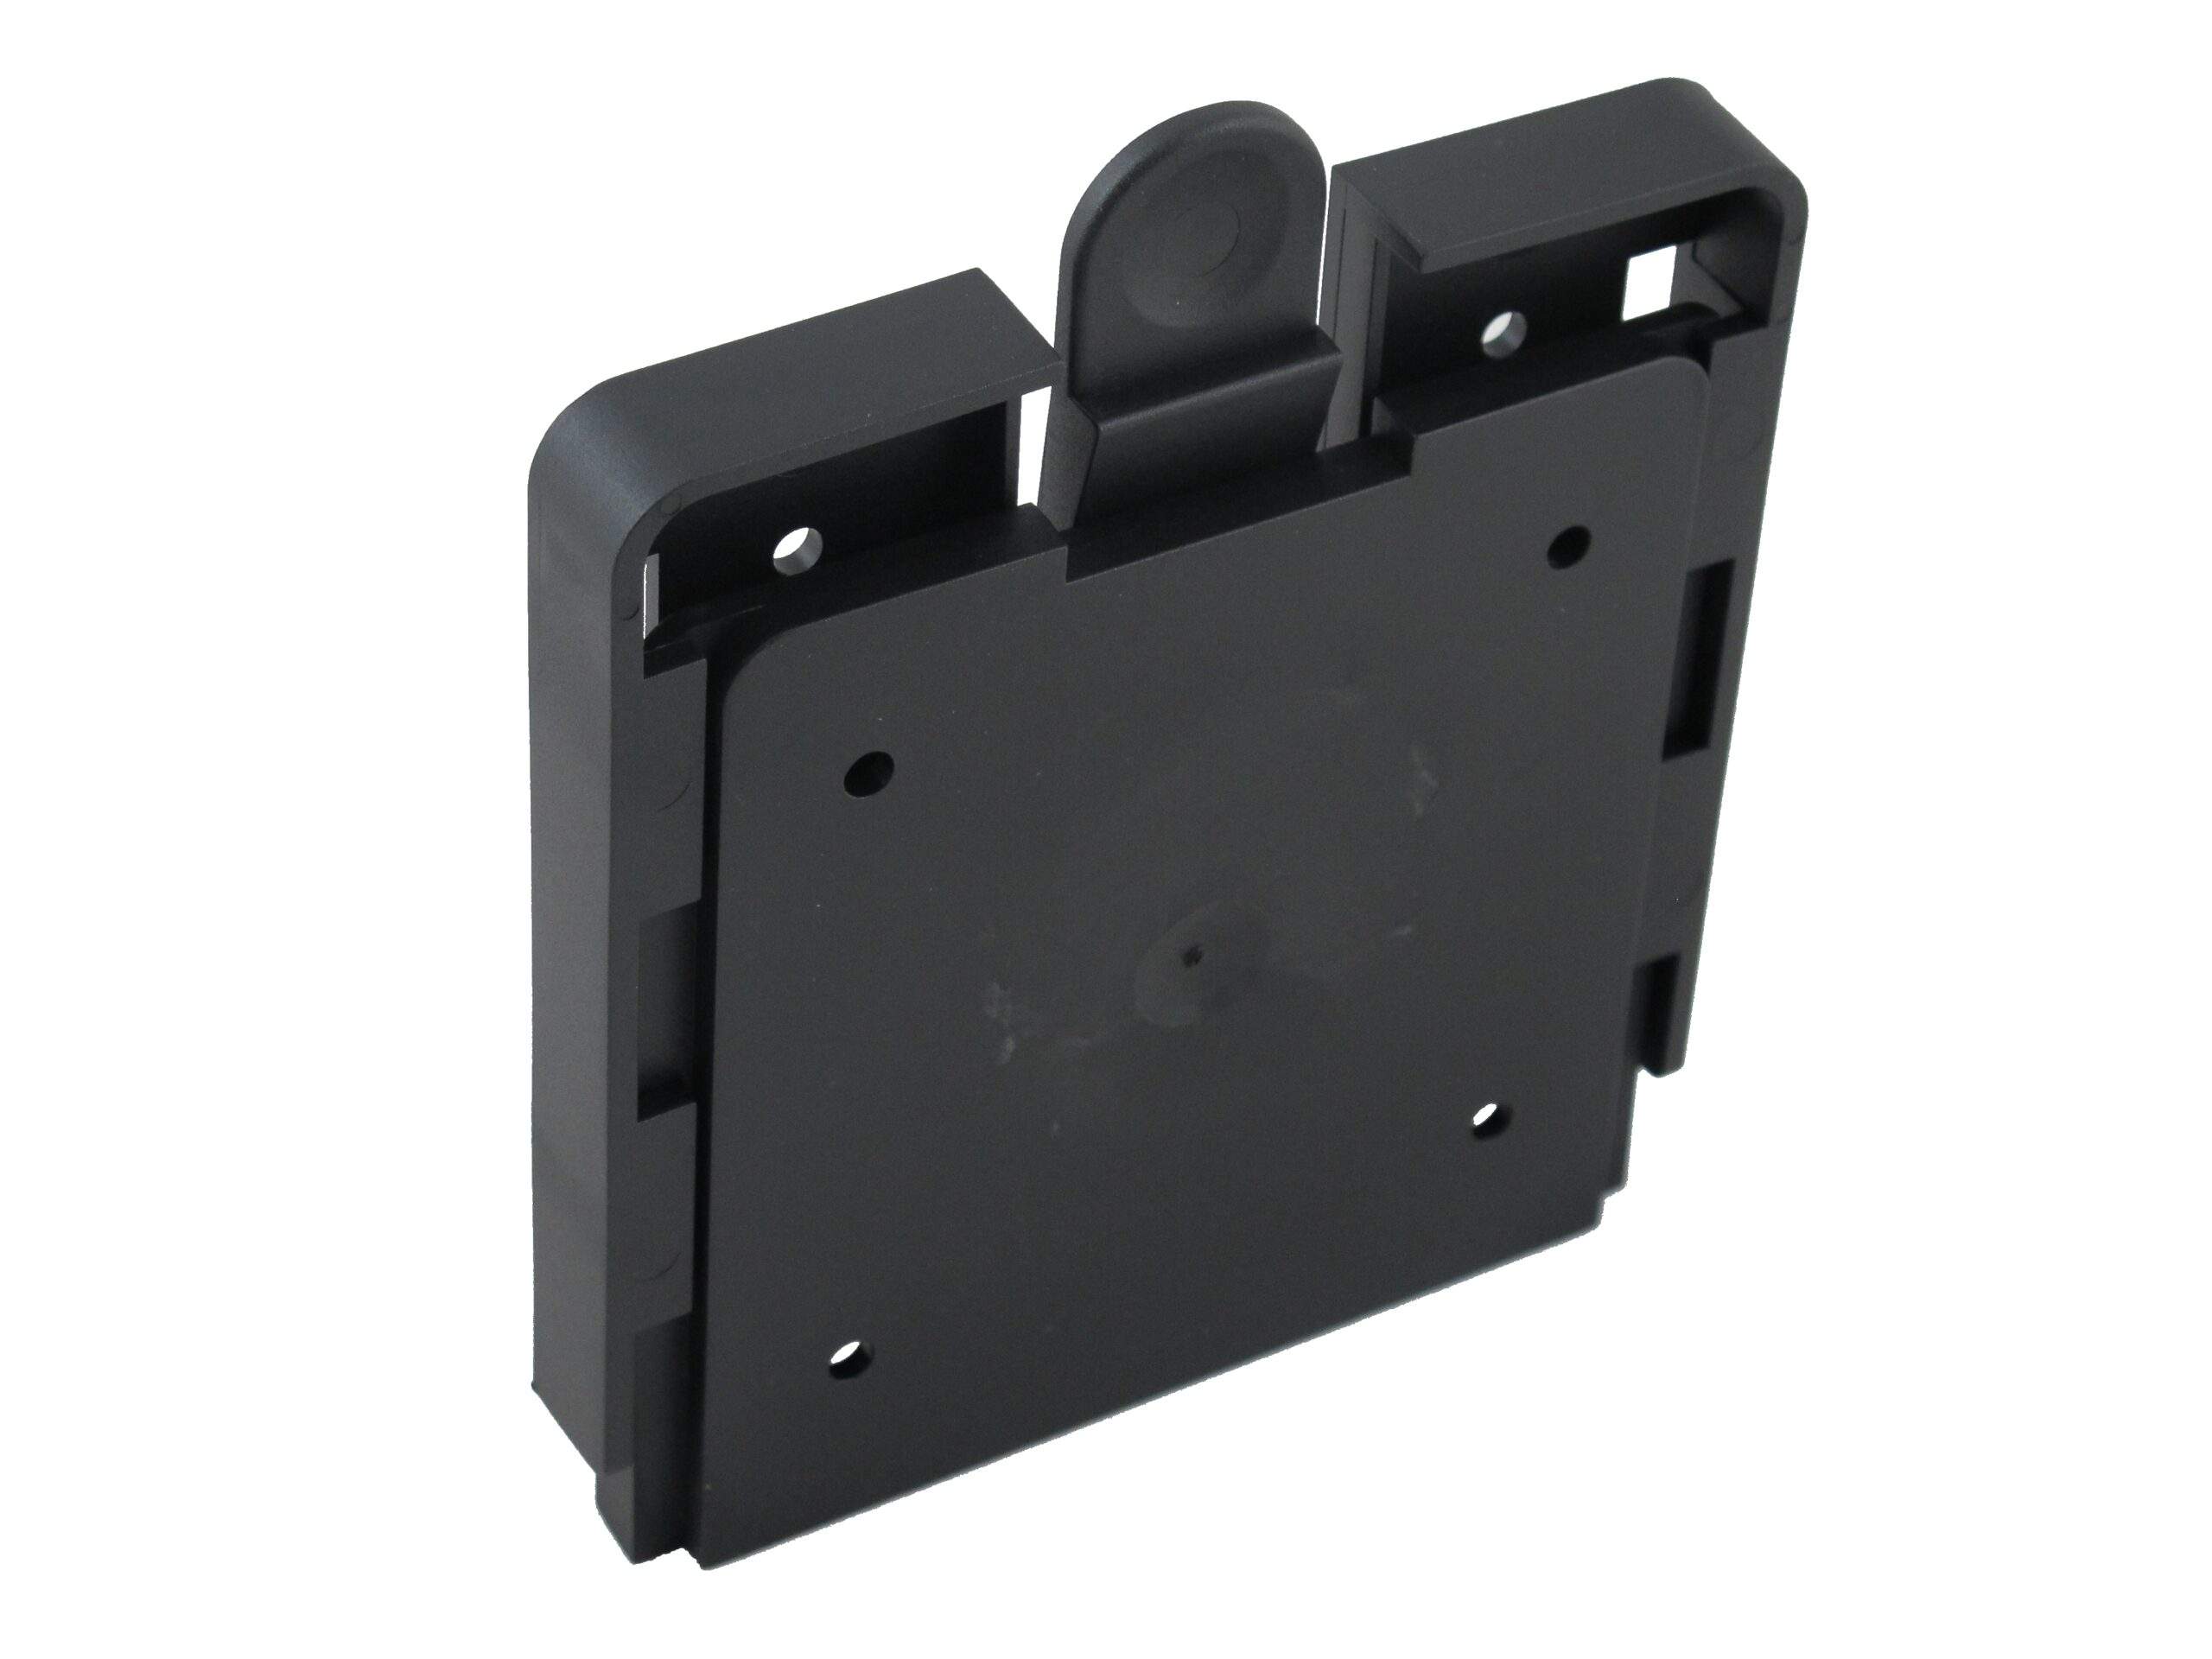 Vision Plus – “Quick Release” TV Bracket + Replacement TV mounting plate –  Vision Plus